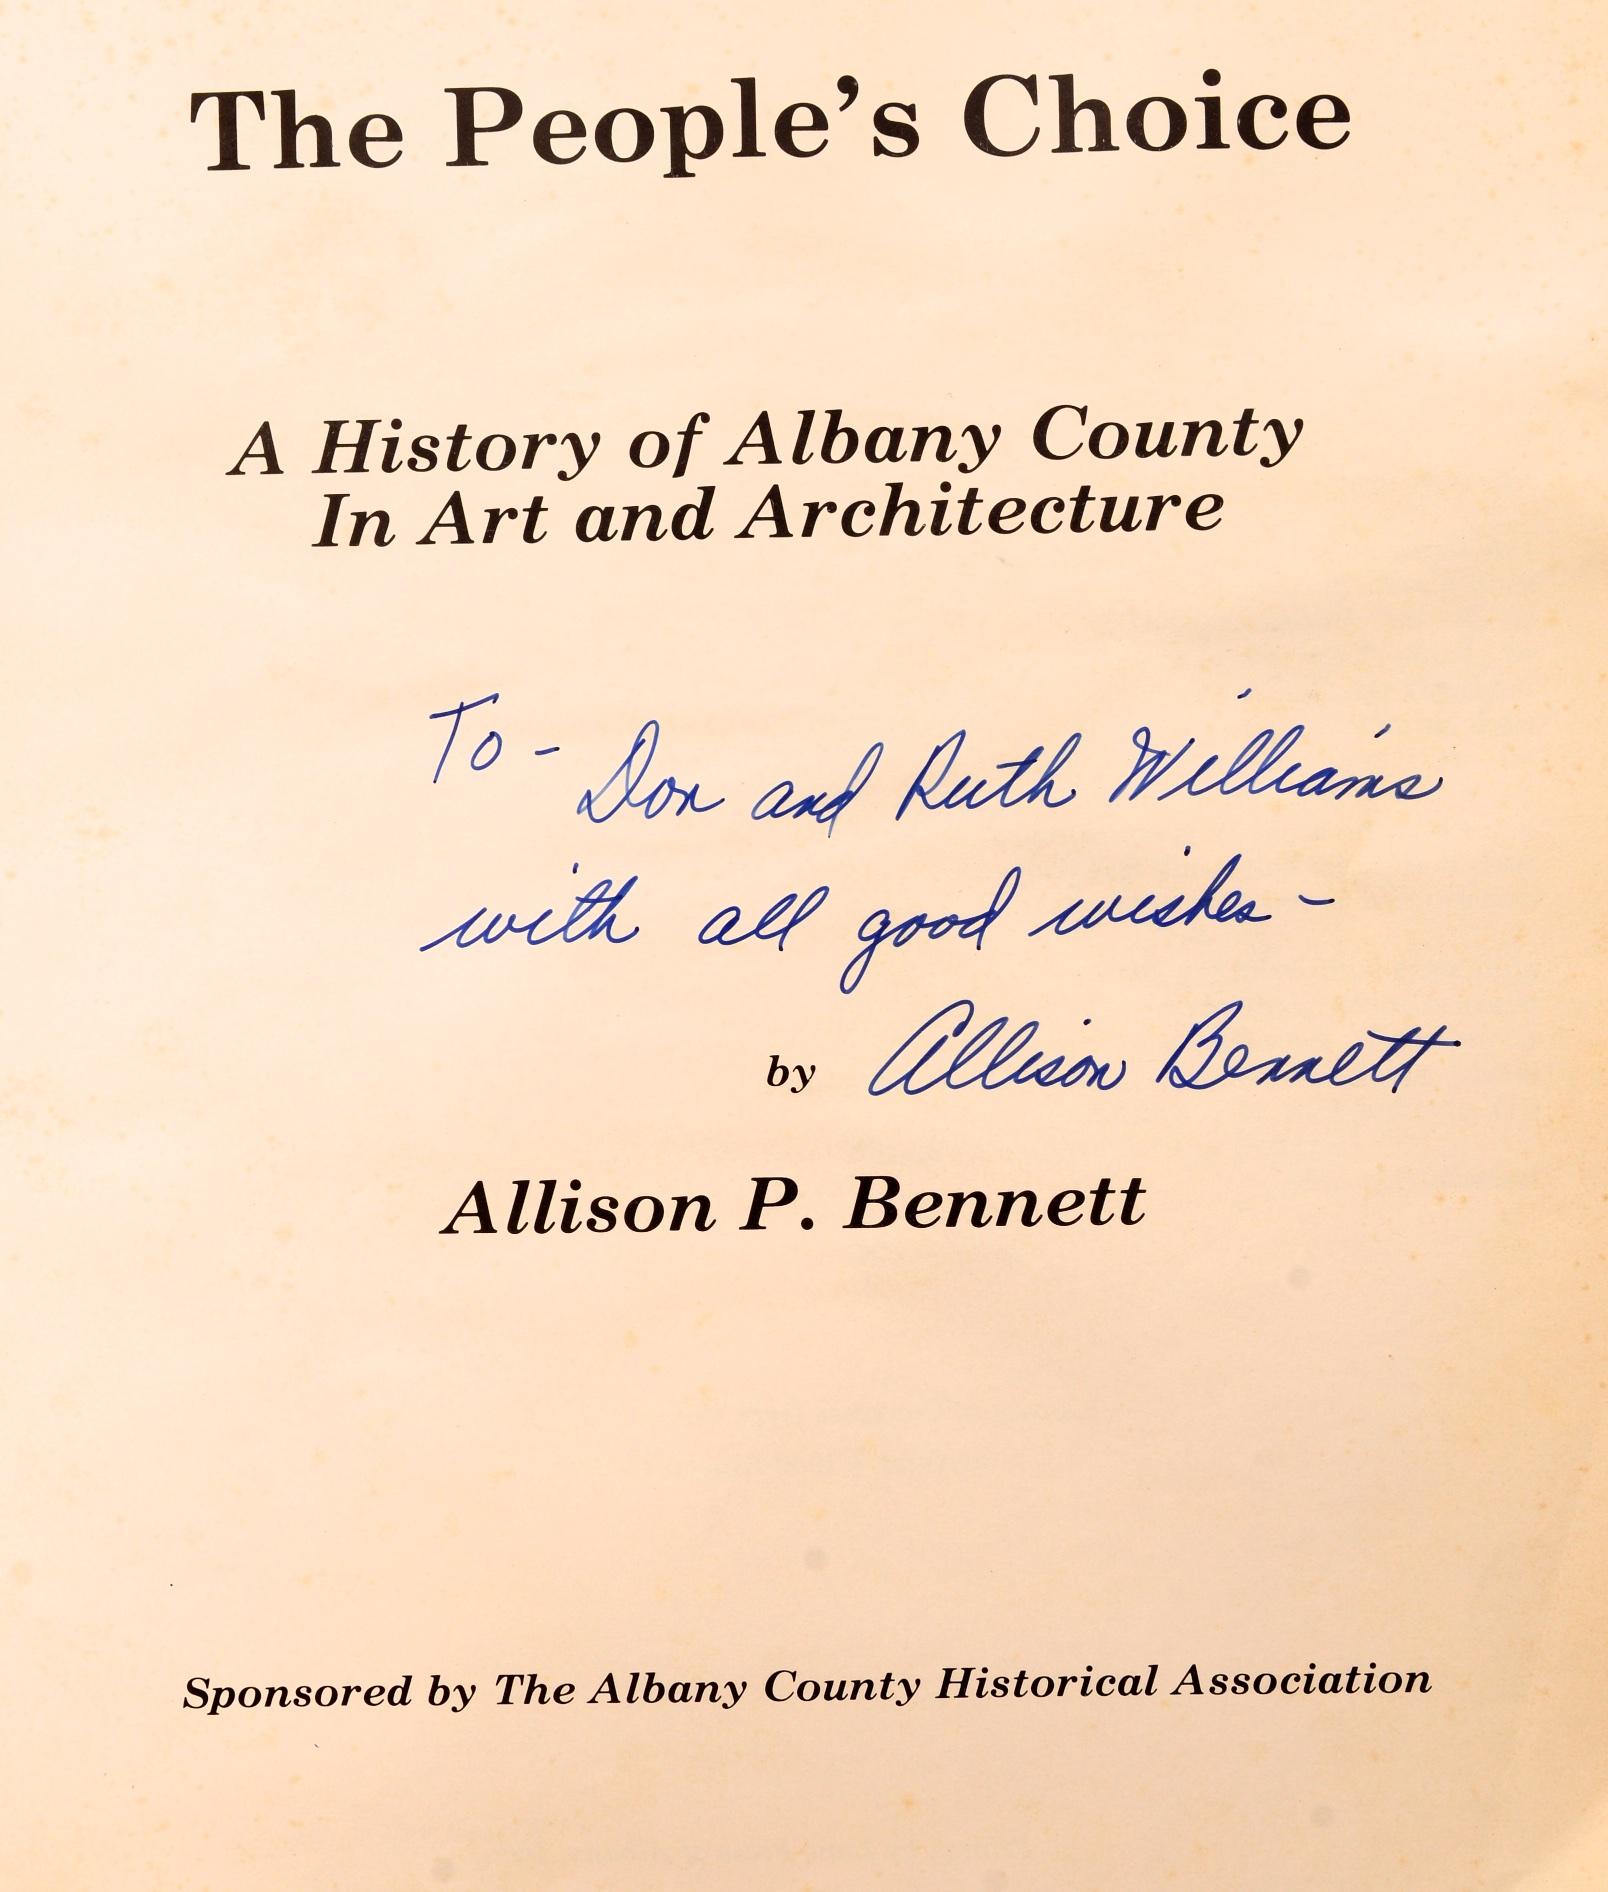 The People's Choice: A History of Albany County in Art and Architecture by Allison P. Bennett. Albany County Historical Association, Lane Press, Albany, 1980. Inscribed by the author First Edition softcover. Extensively illustrated in black and